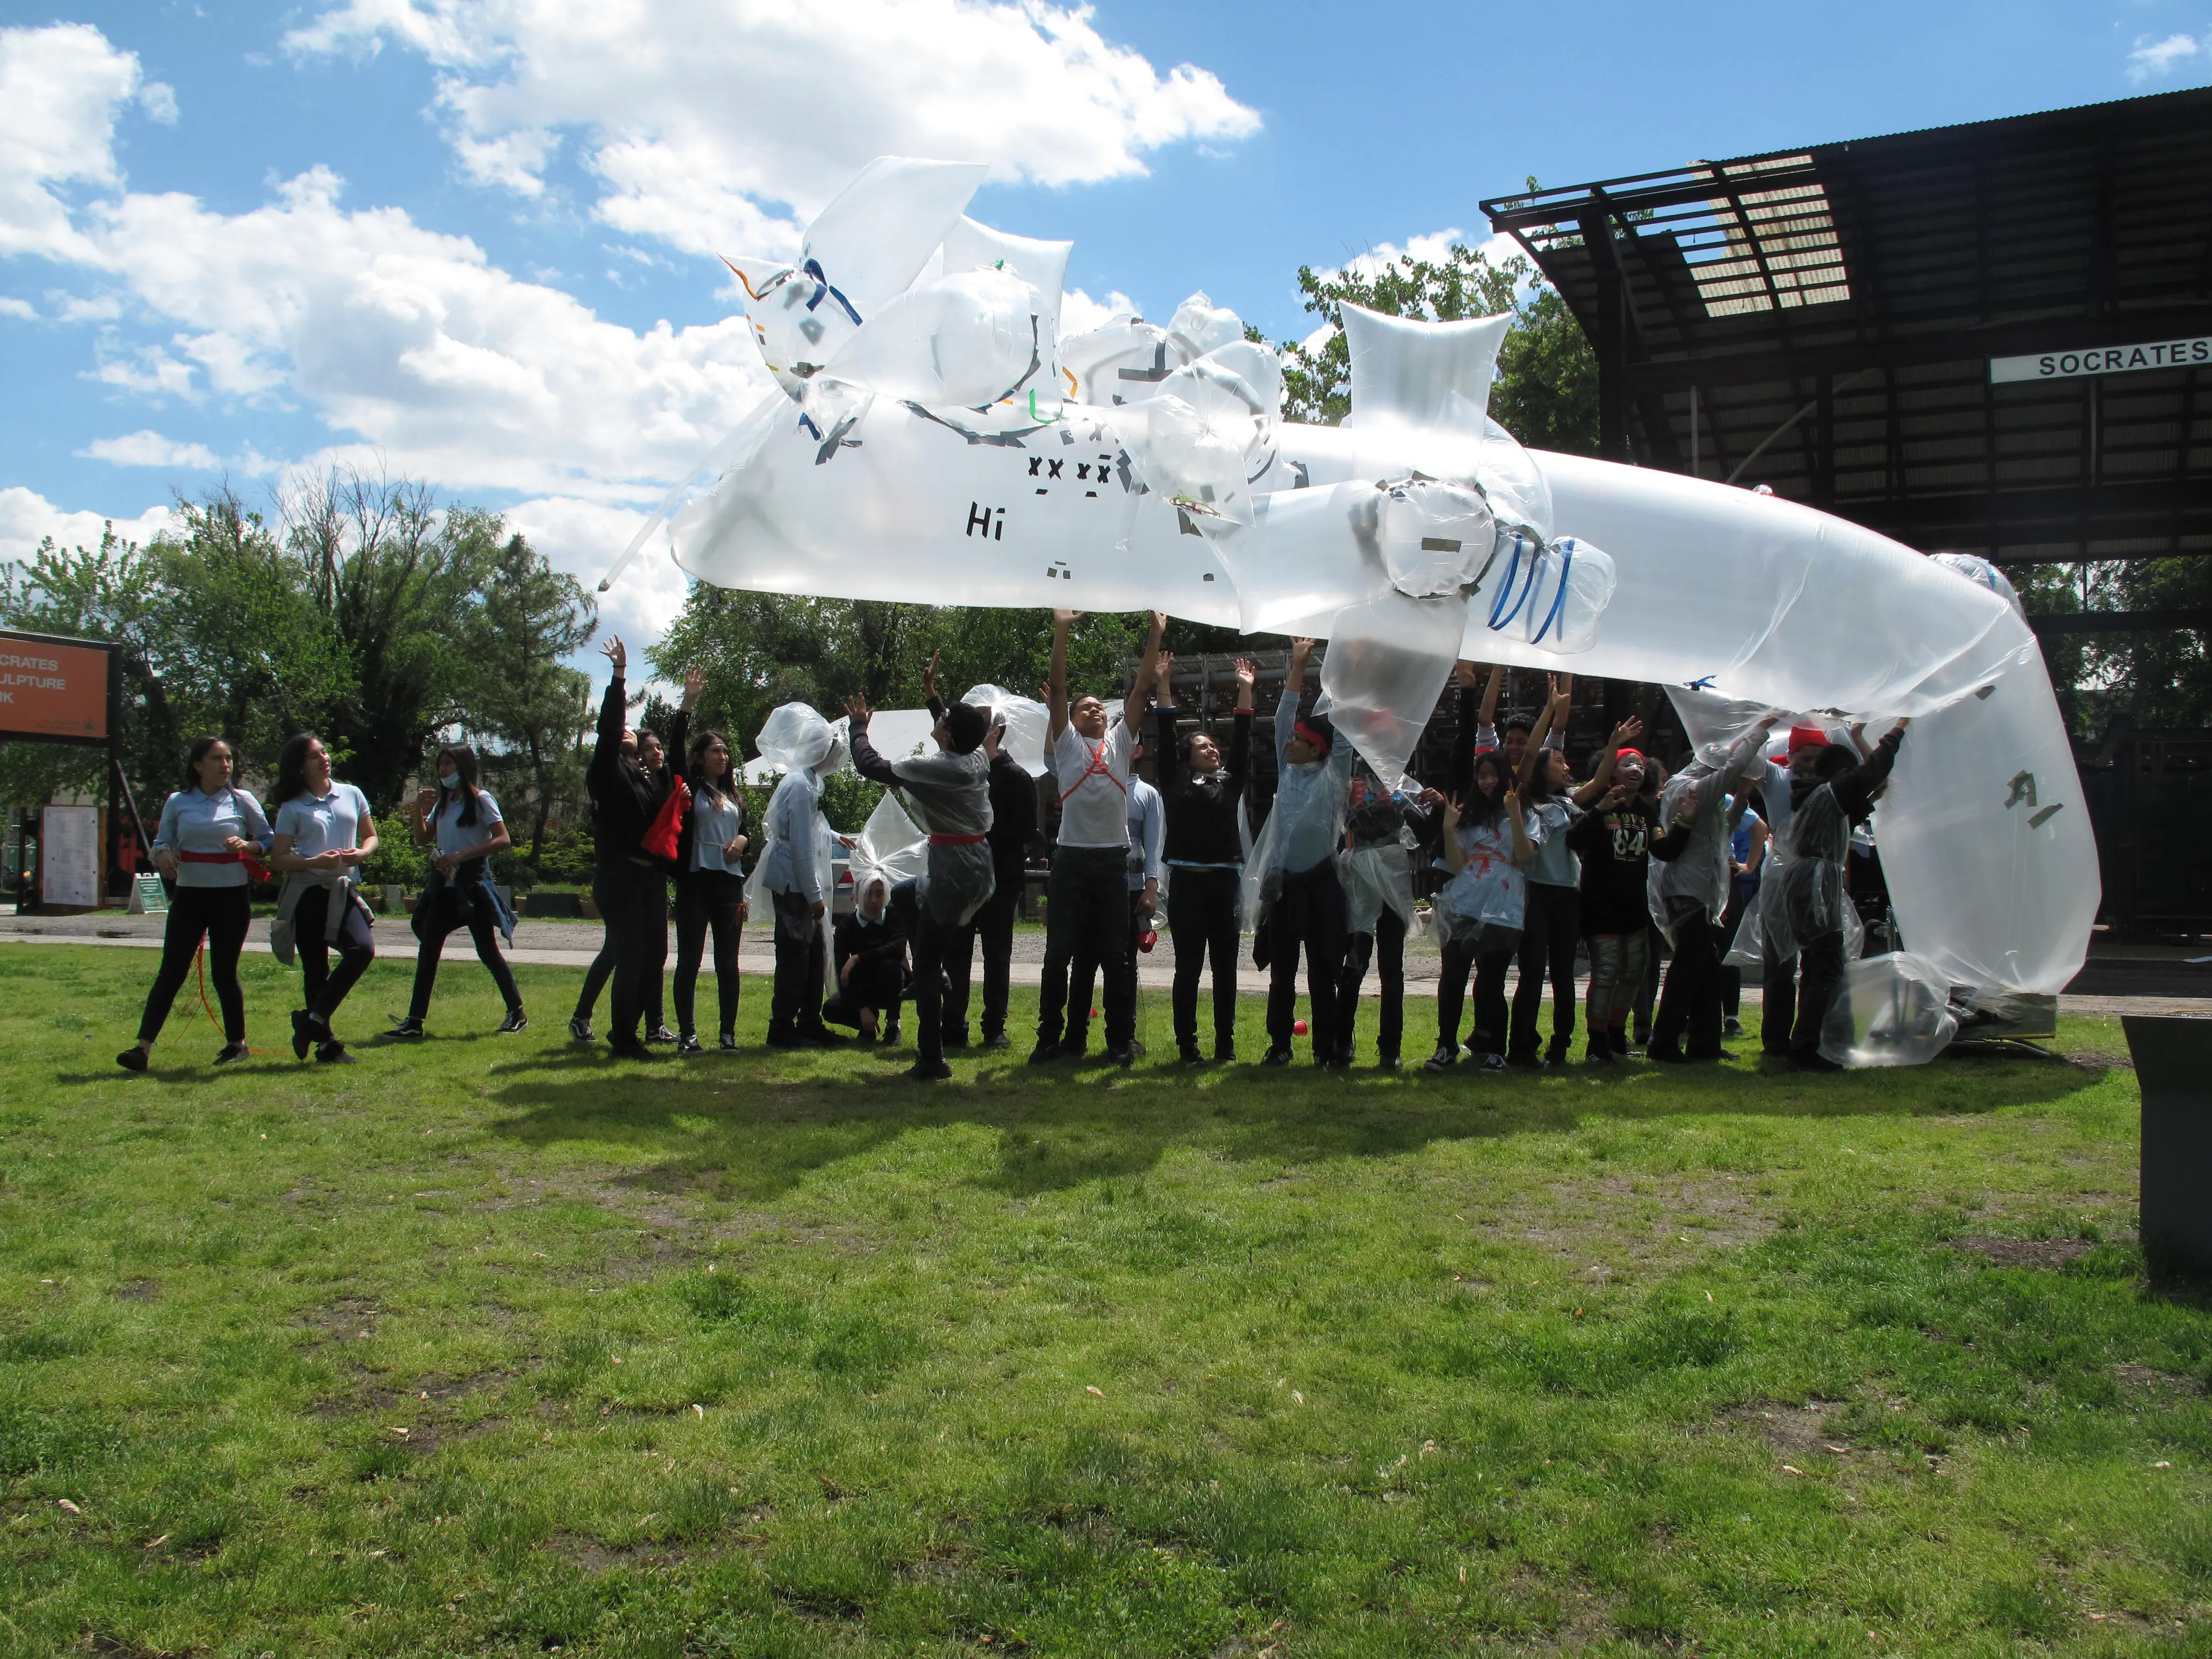 Photo of many kids playing with large transparent inflatable sculpture.